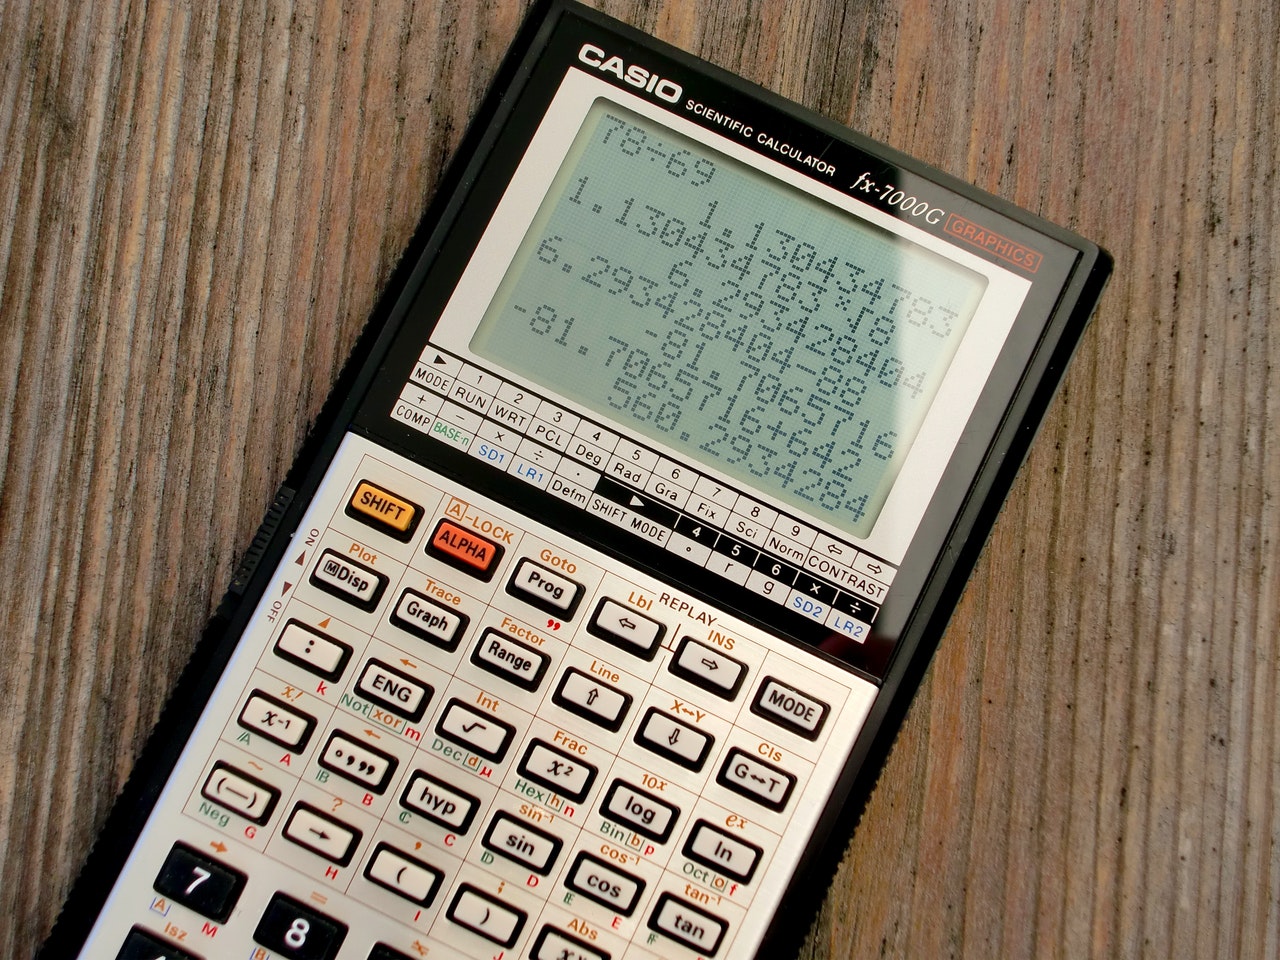 Photo of a calculator to illustrate the idea of proof of work.